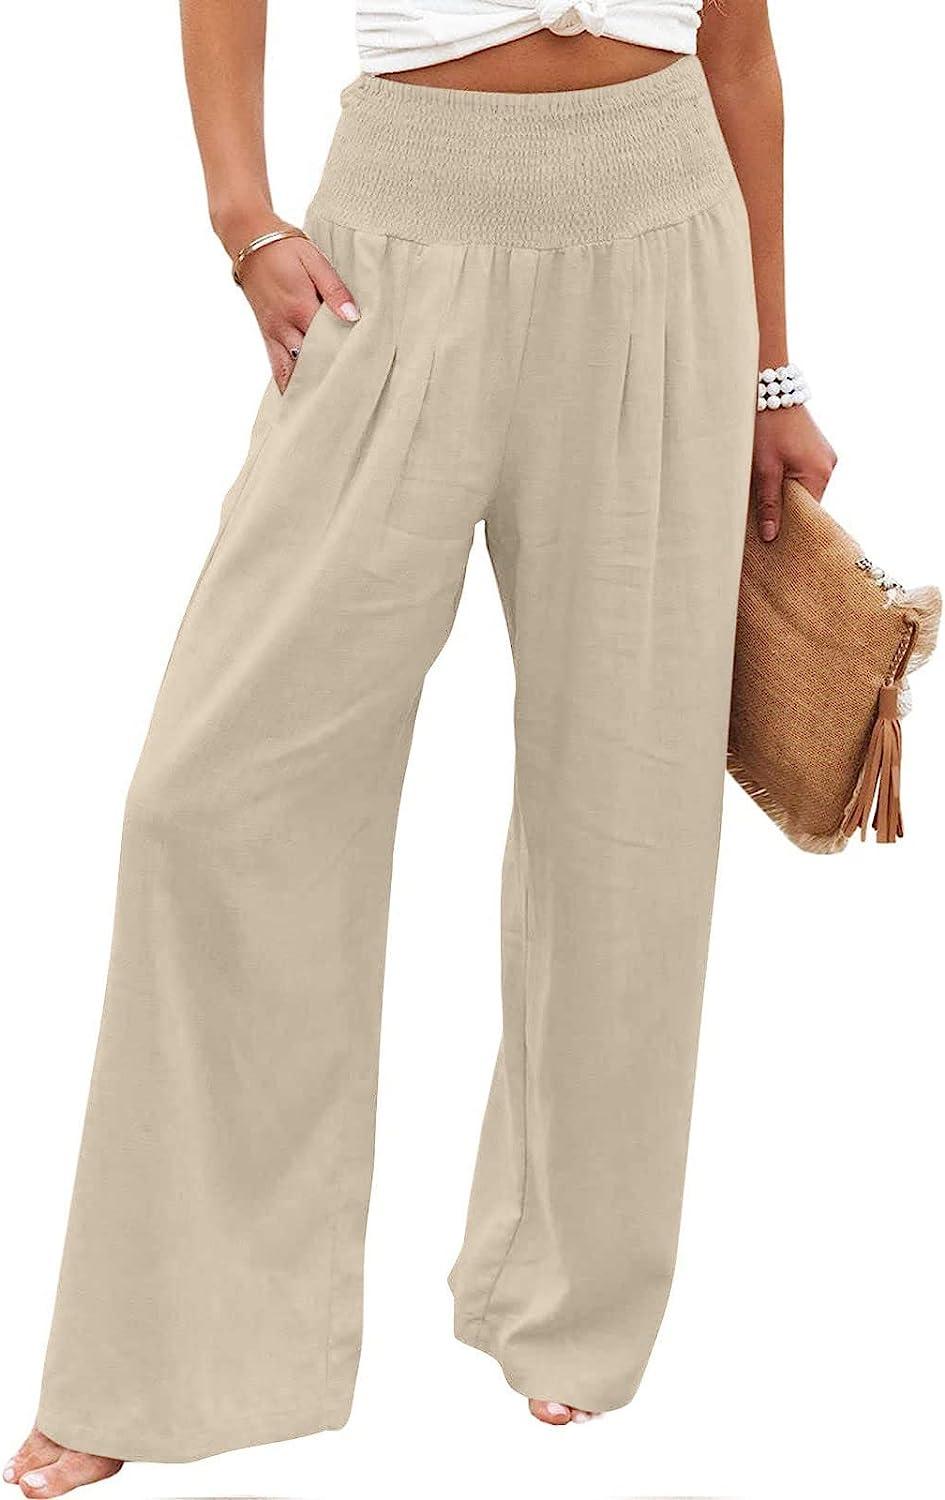 Women's Straight Leg Pant Cotton Linen Regular Fit Pant Summer Casual Pants  Drawstring Long Trousers with Pockets New